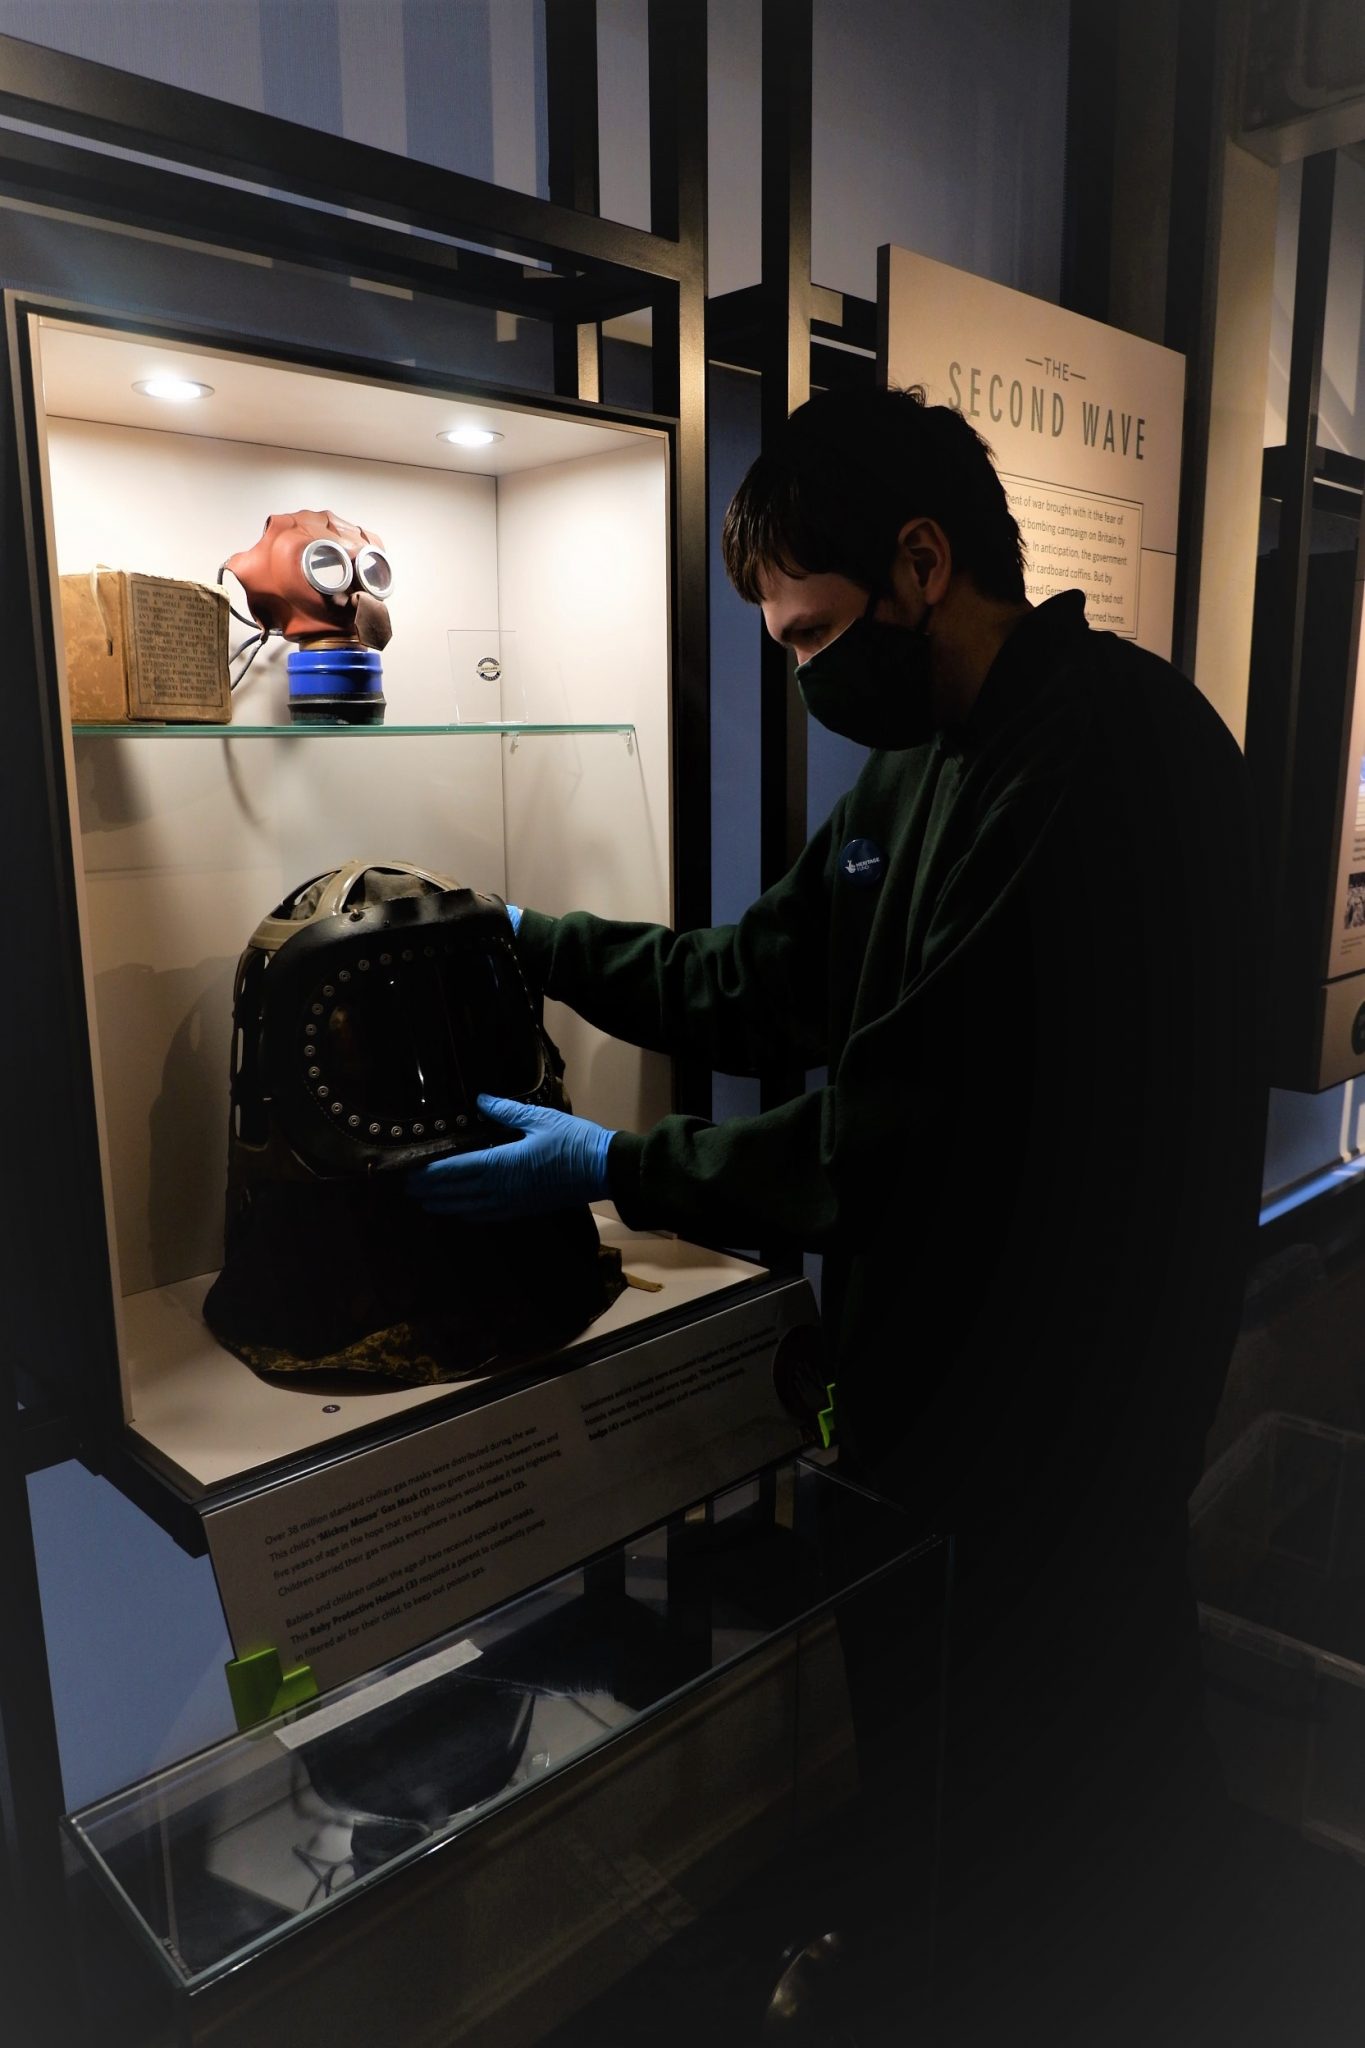 A person lifting a gas mask from a display case.